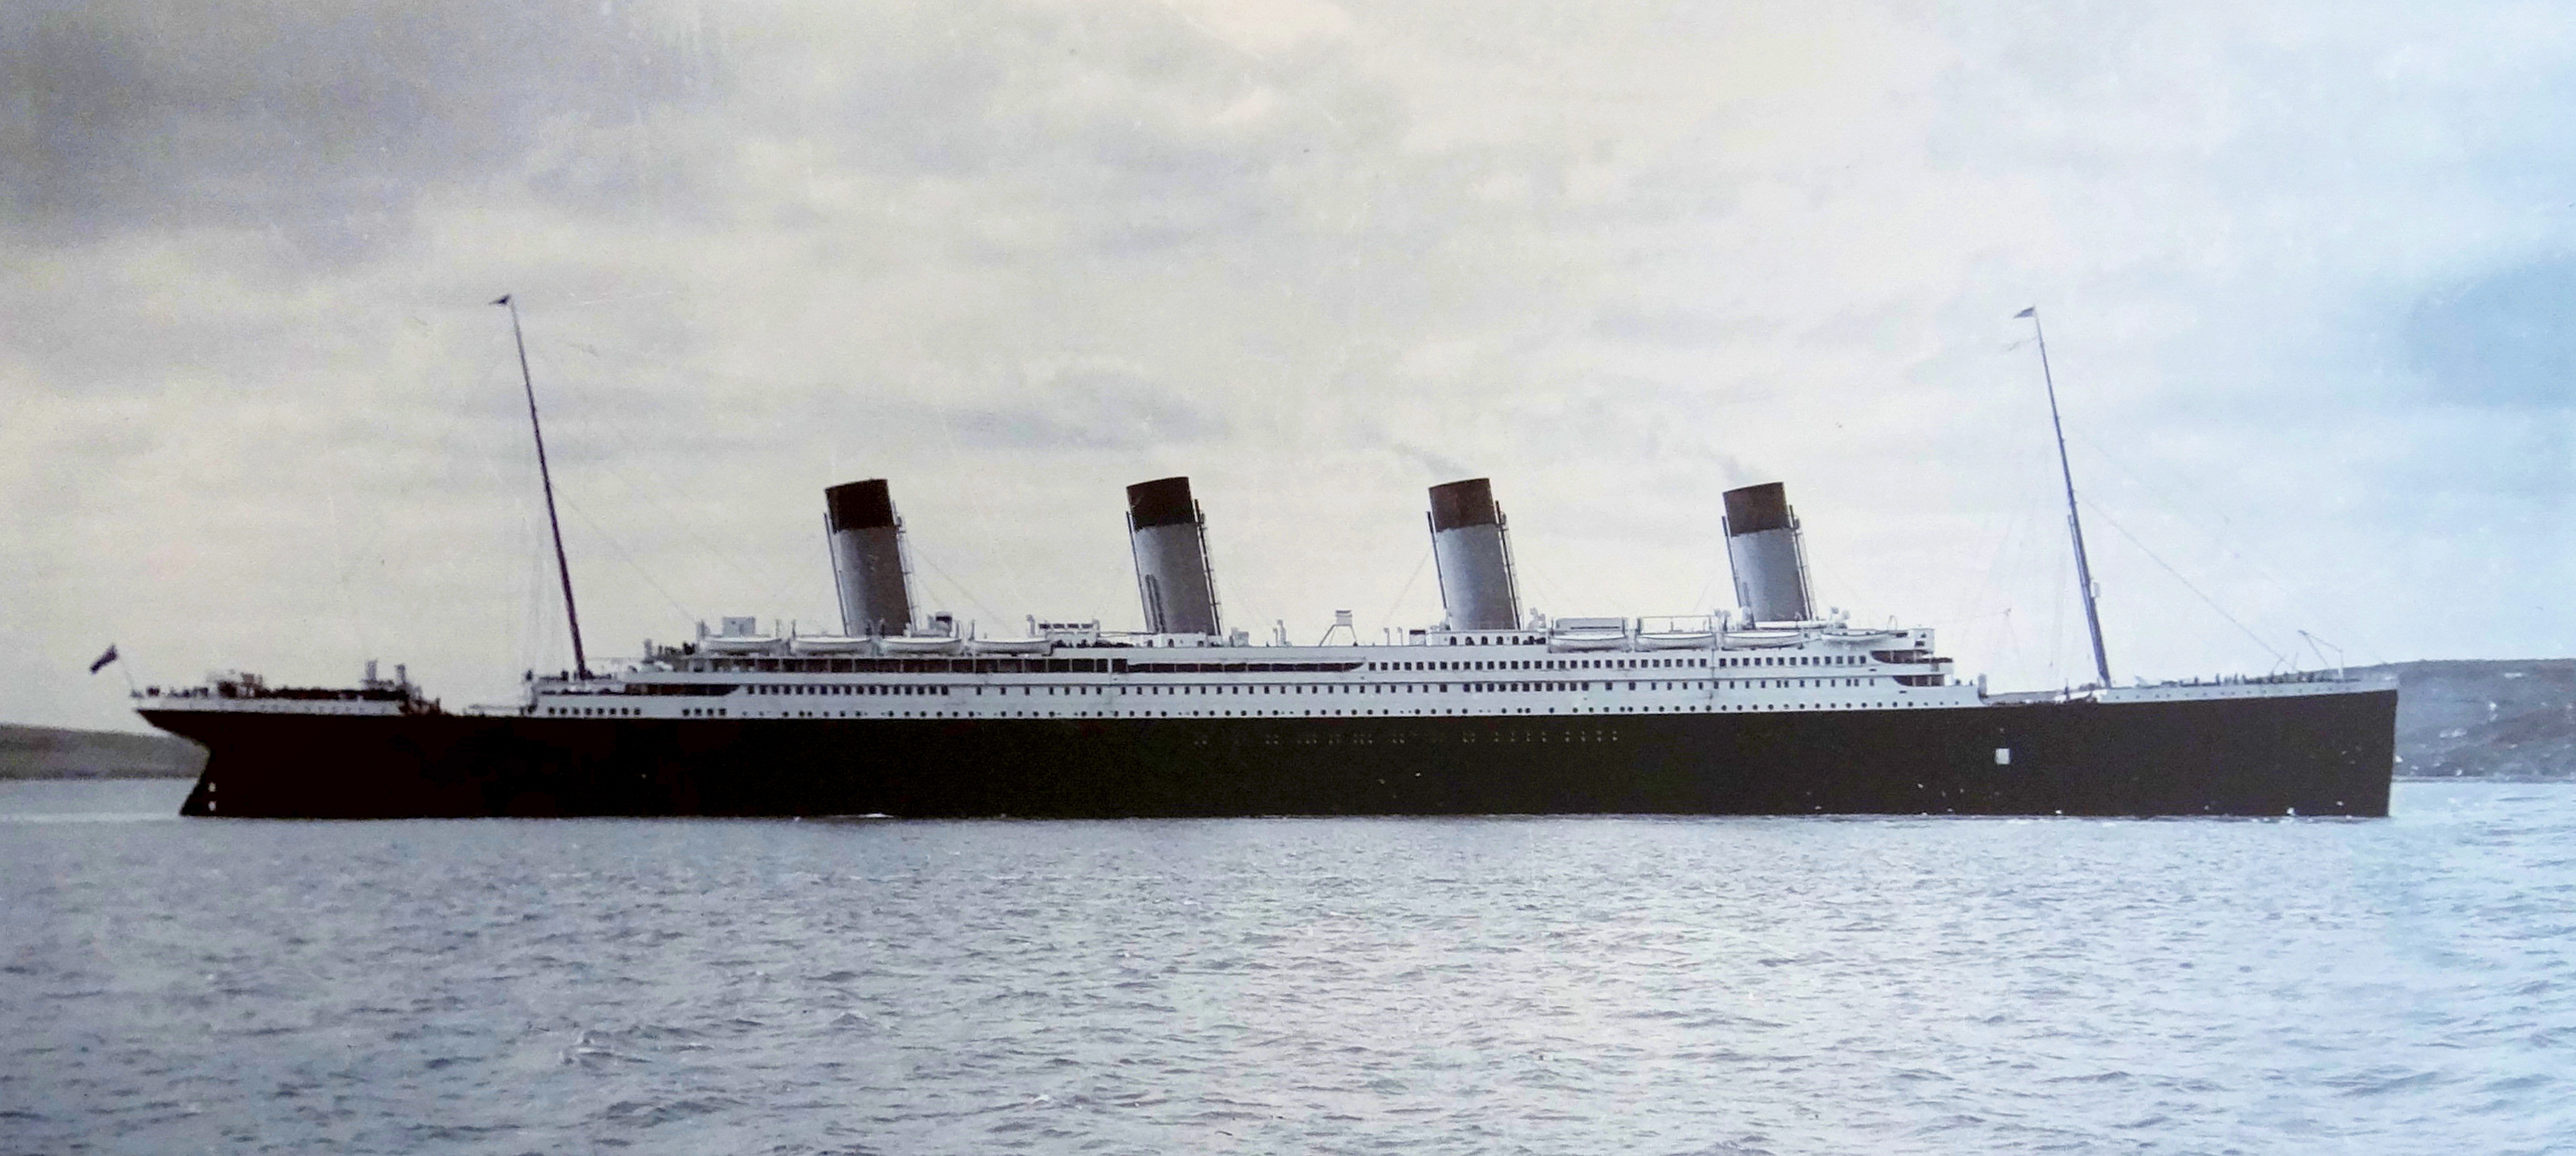 16 things you didn't know about the Titanic disaster - The Daily Universe